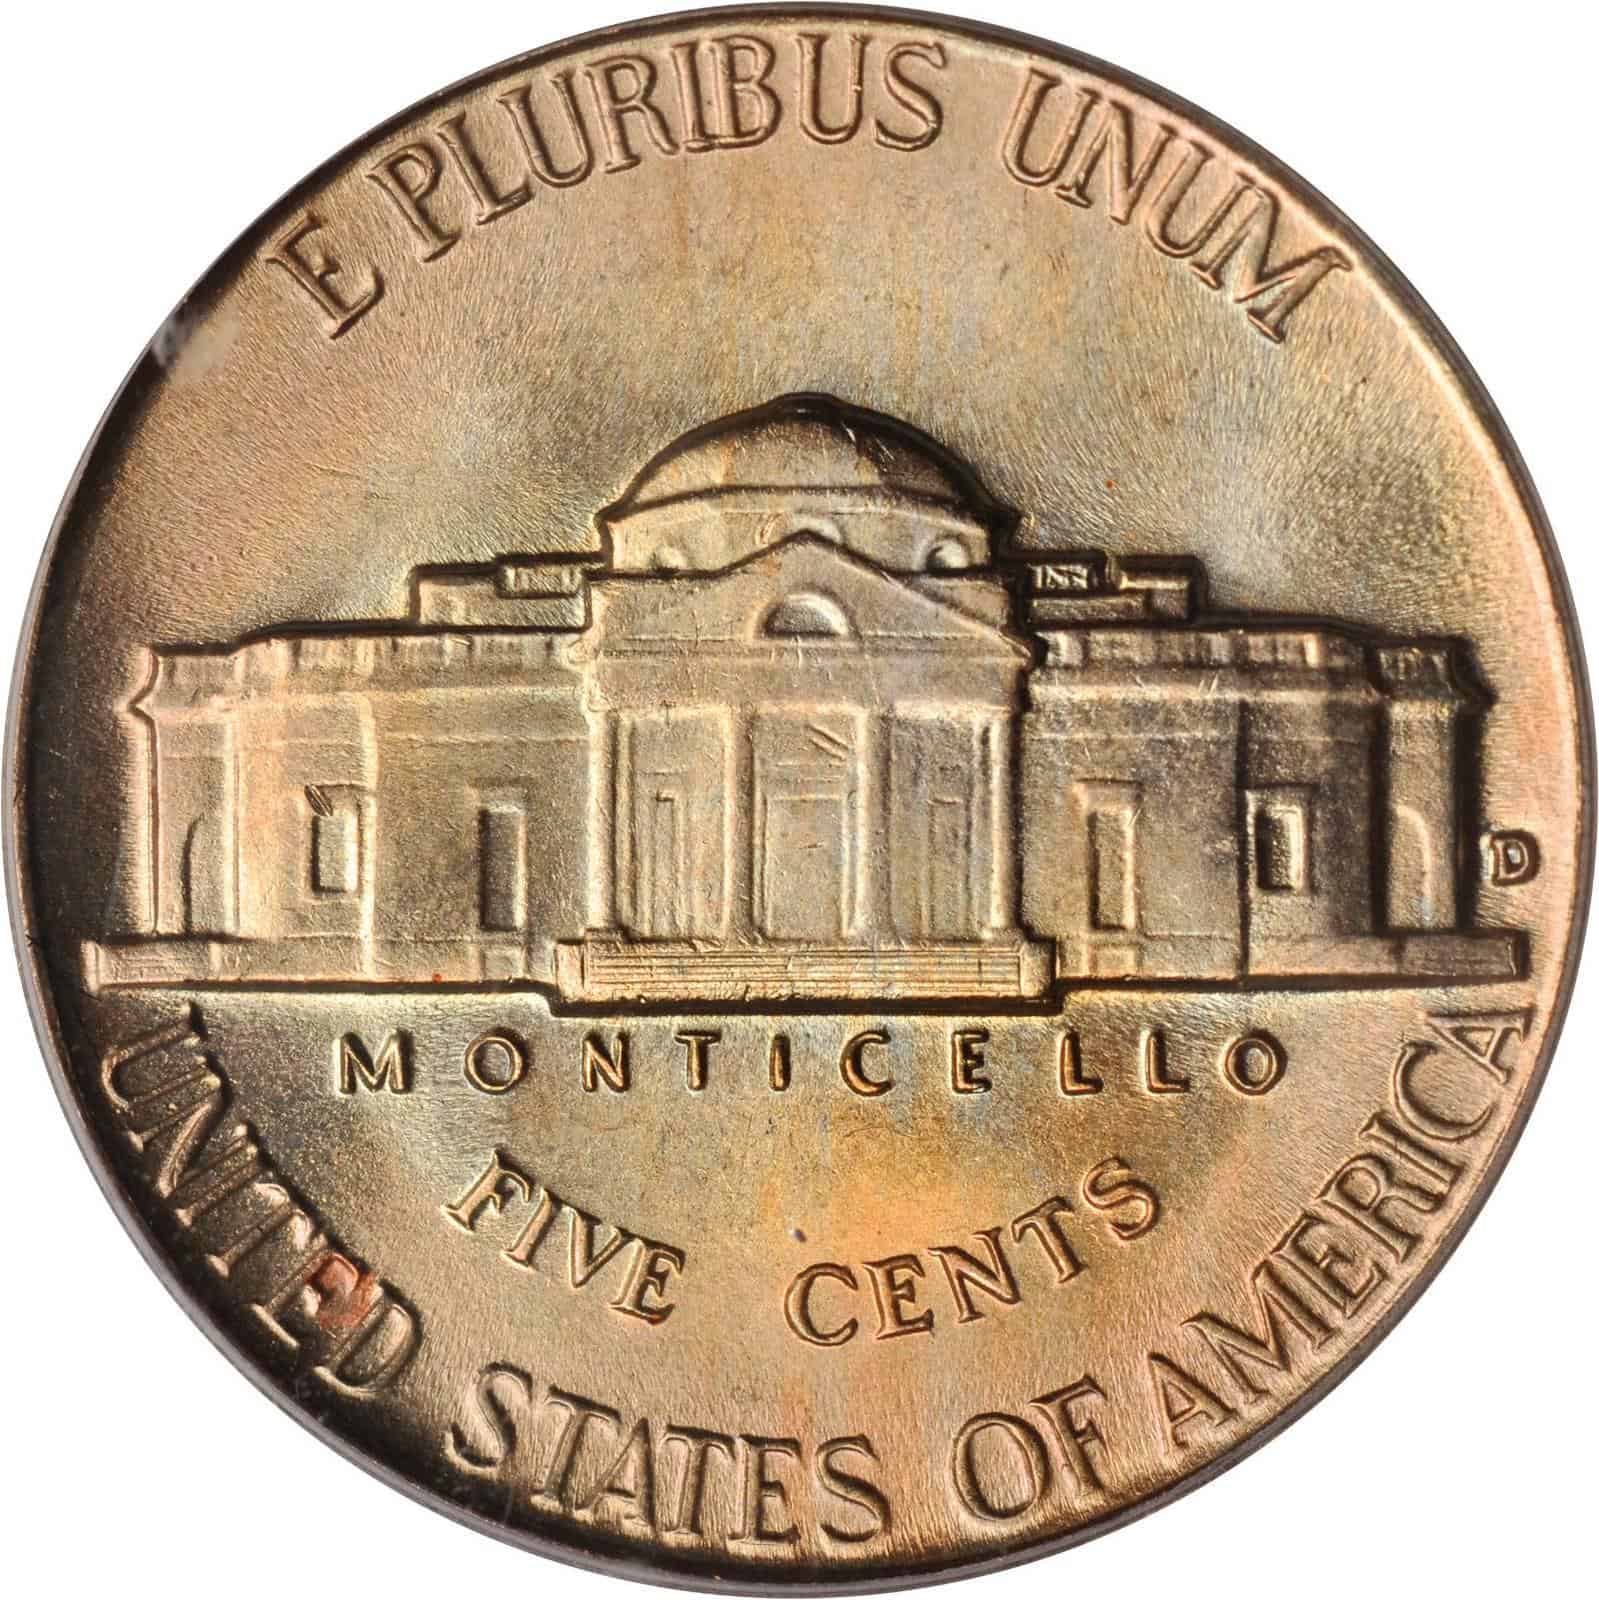 The reverse of the 1946 Jefferson nickel